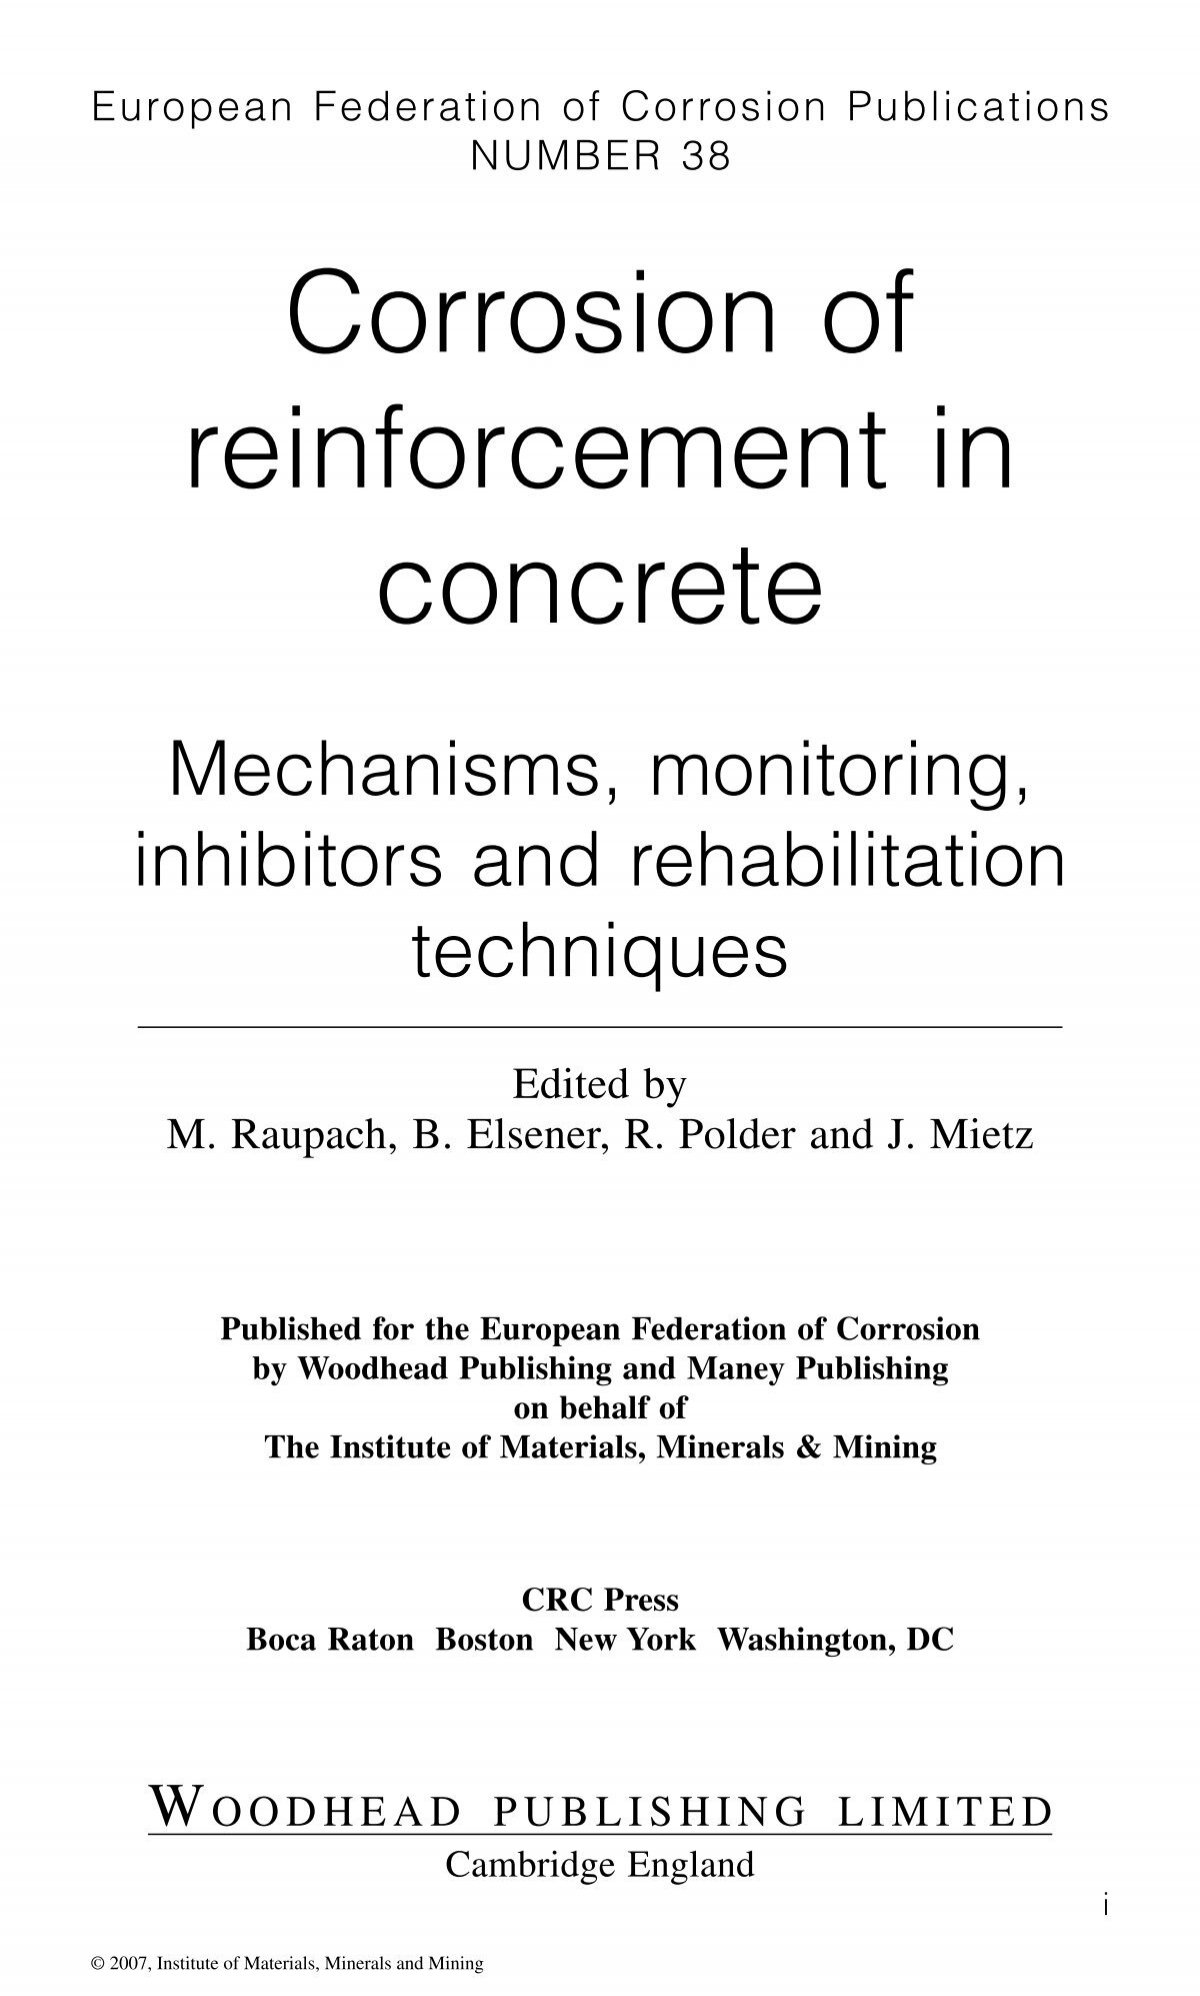 Corrosion of reinforcement in concrete: Mechanisms, monitoring